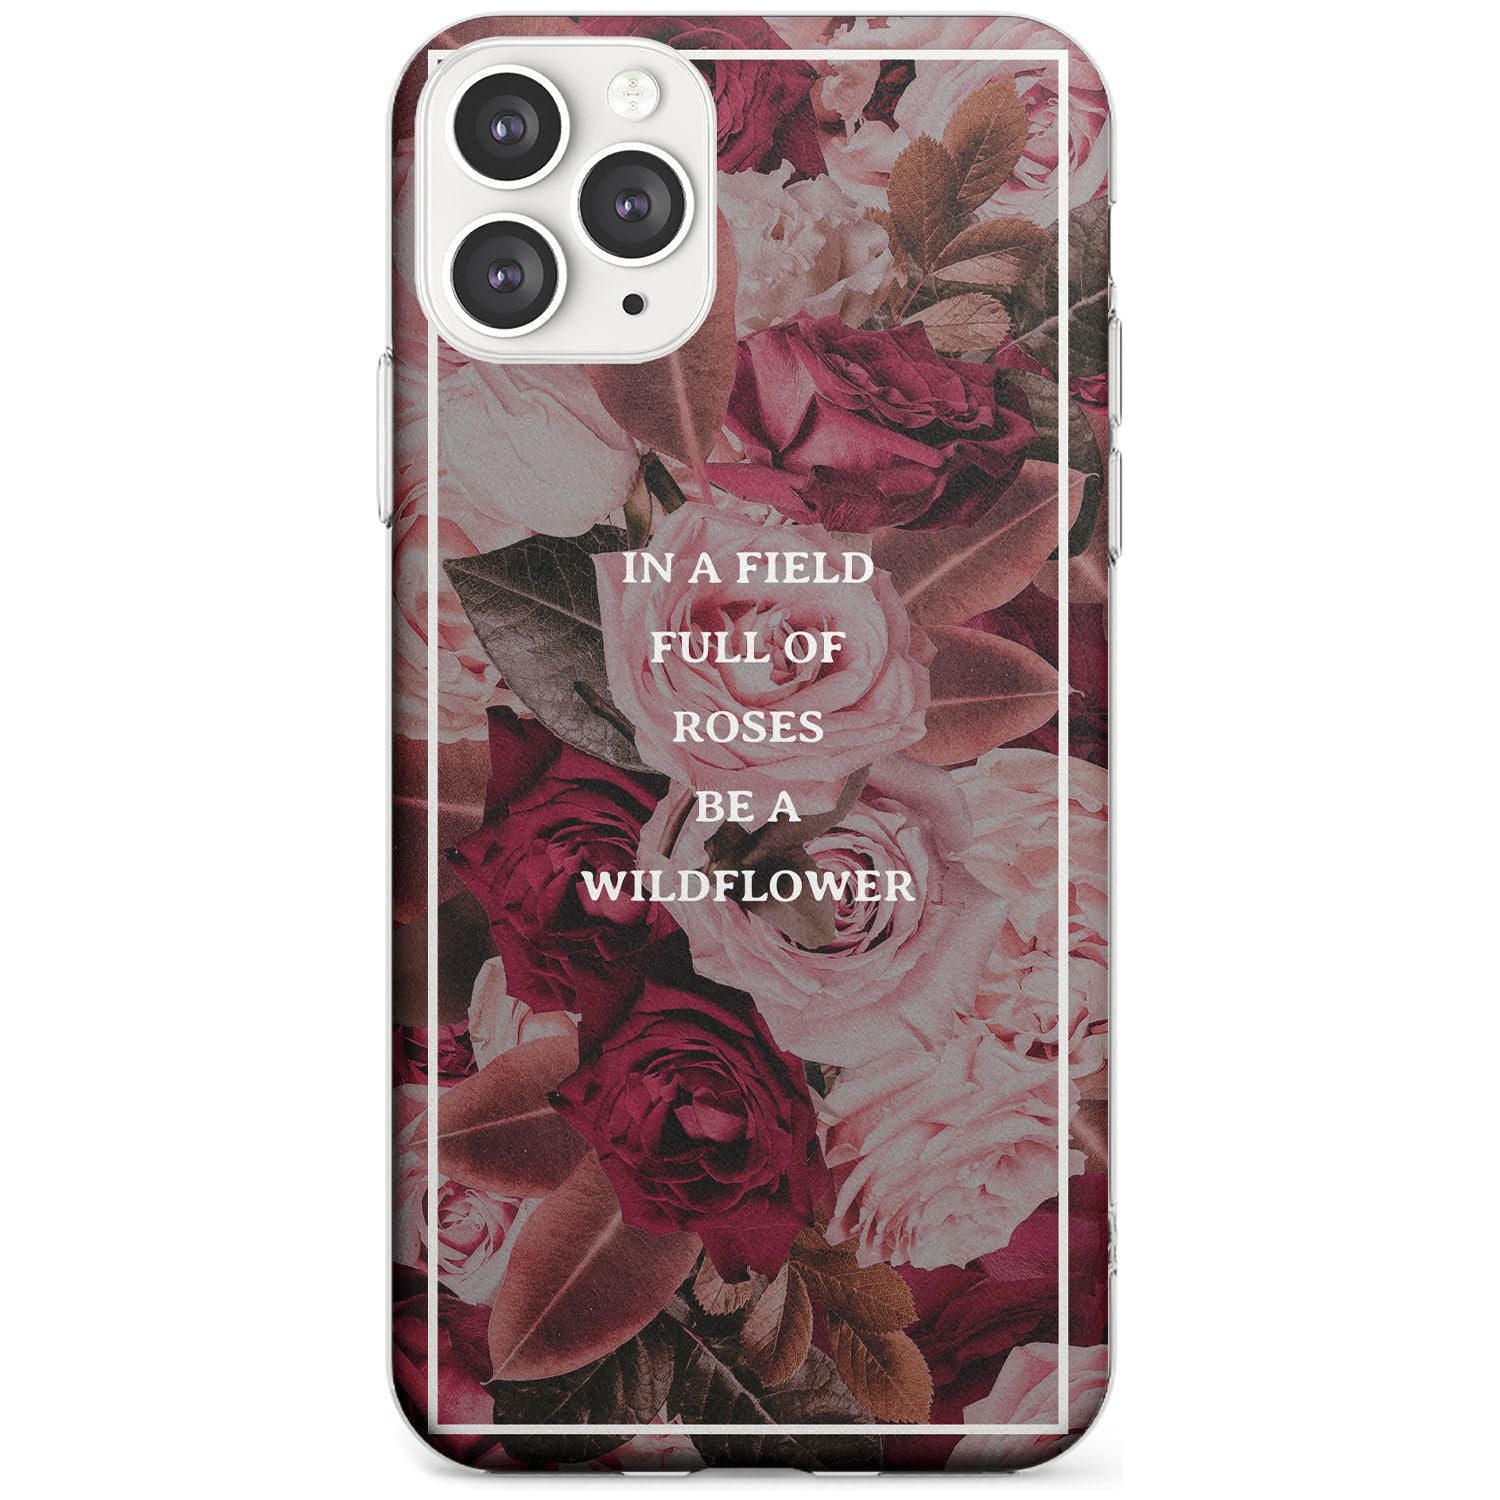 Be a Wildflower Floral Quote Slim TPU Phone Case for iPhone 11 Pro Max